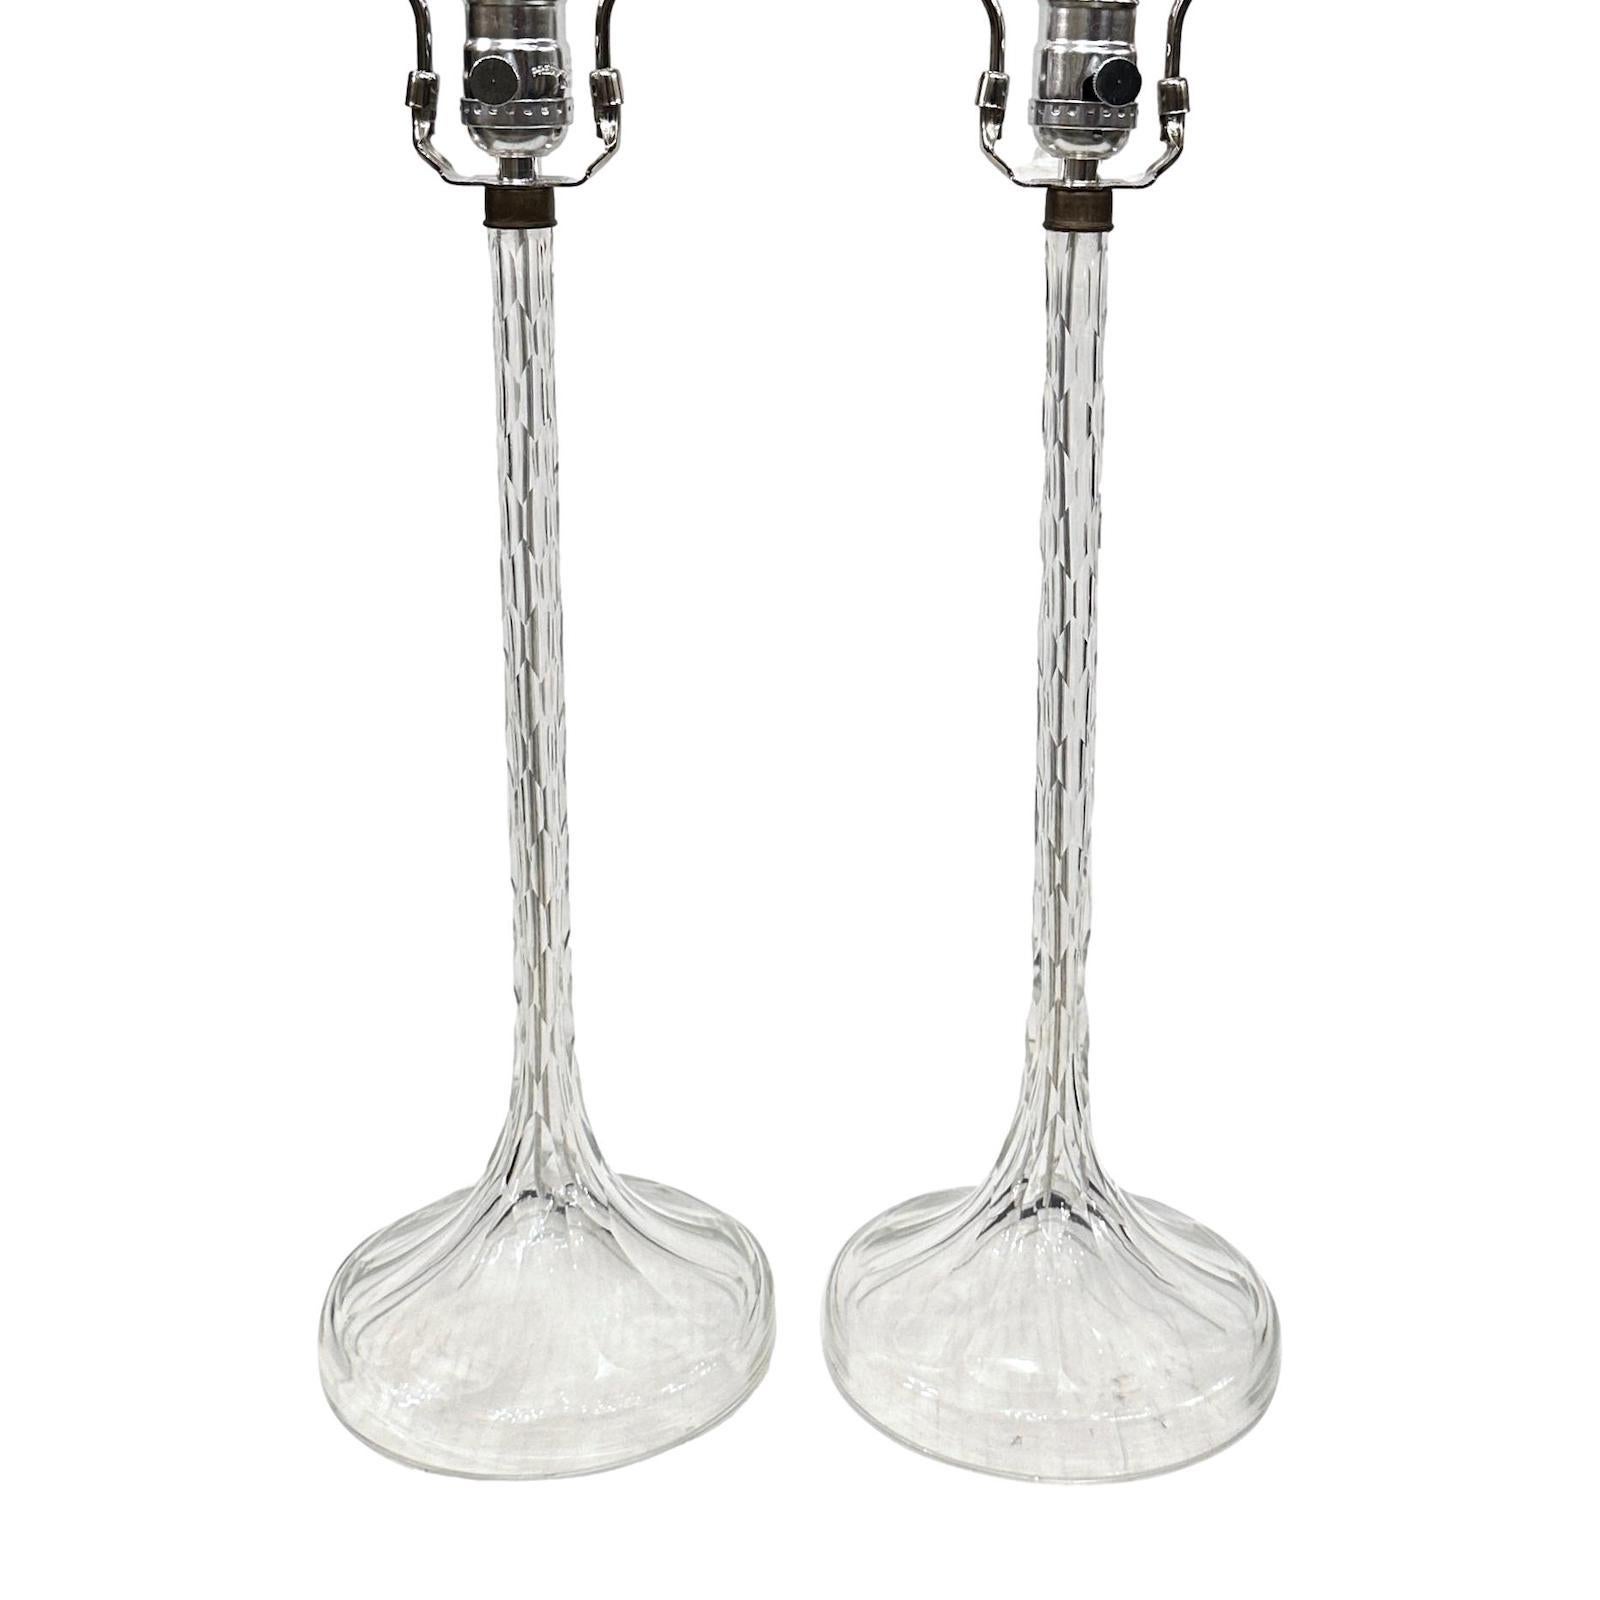 Mid-20th Century Pair of Clear Cut Glass Lamps For Sale